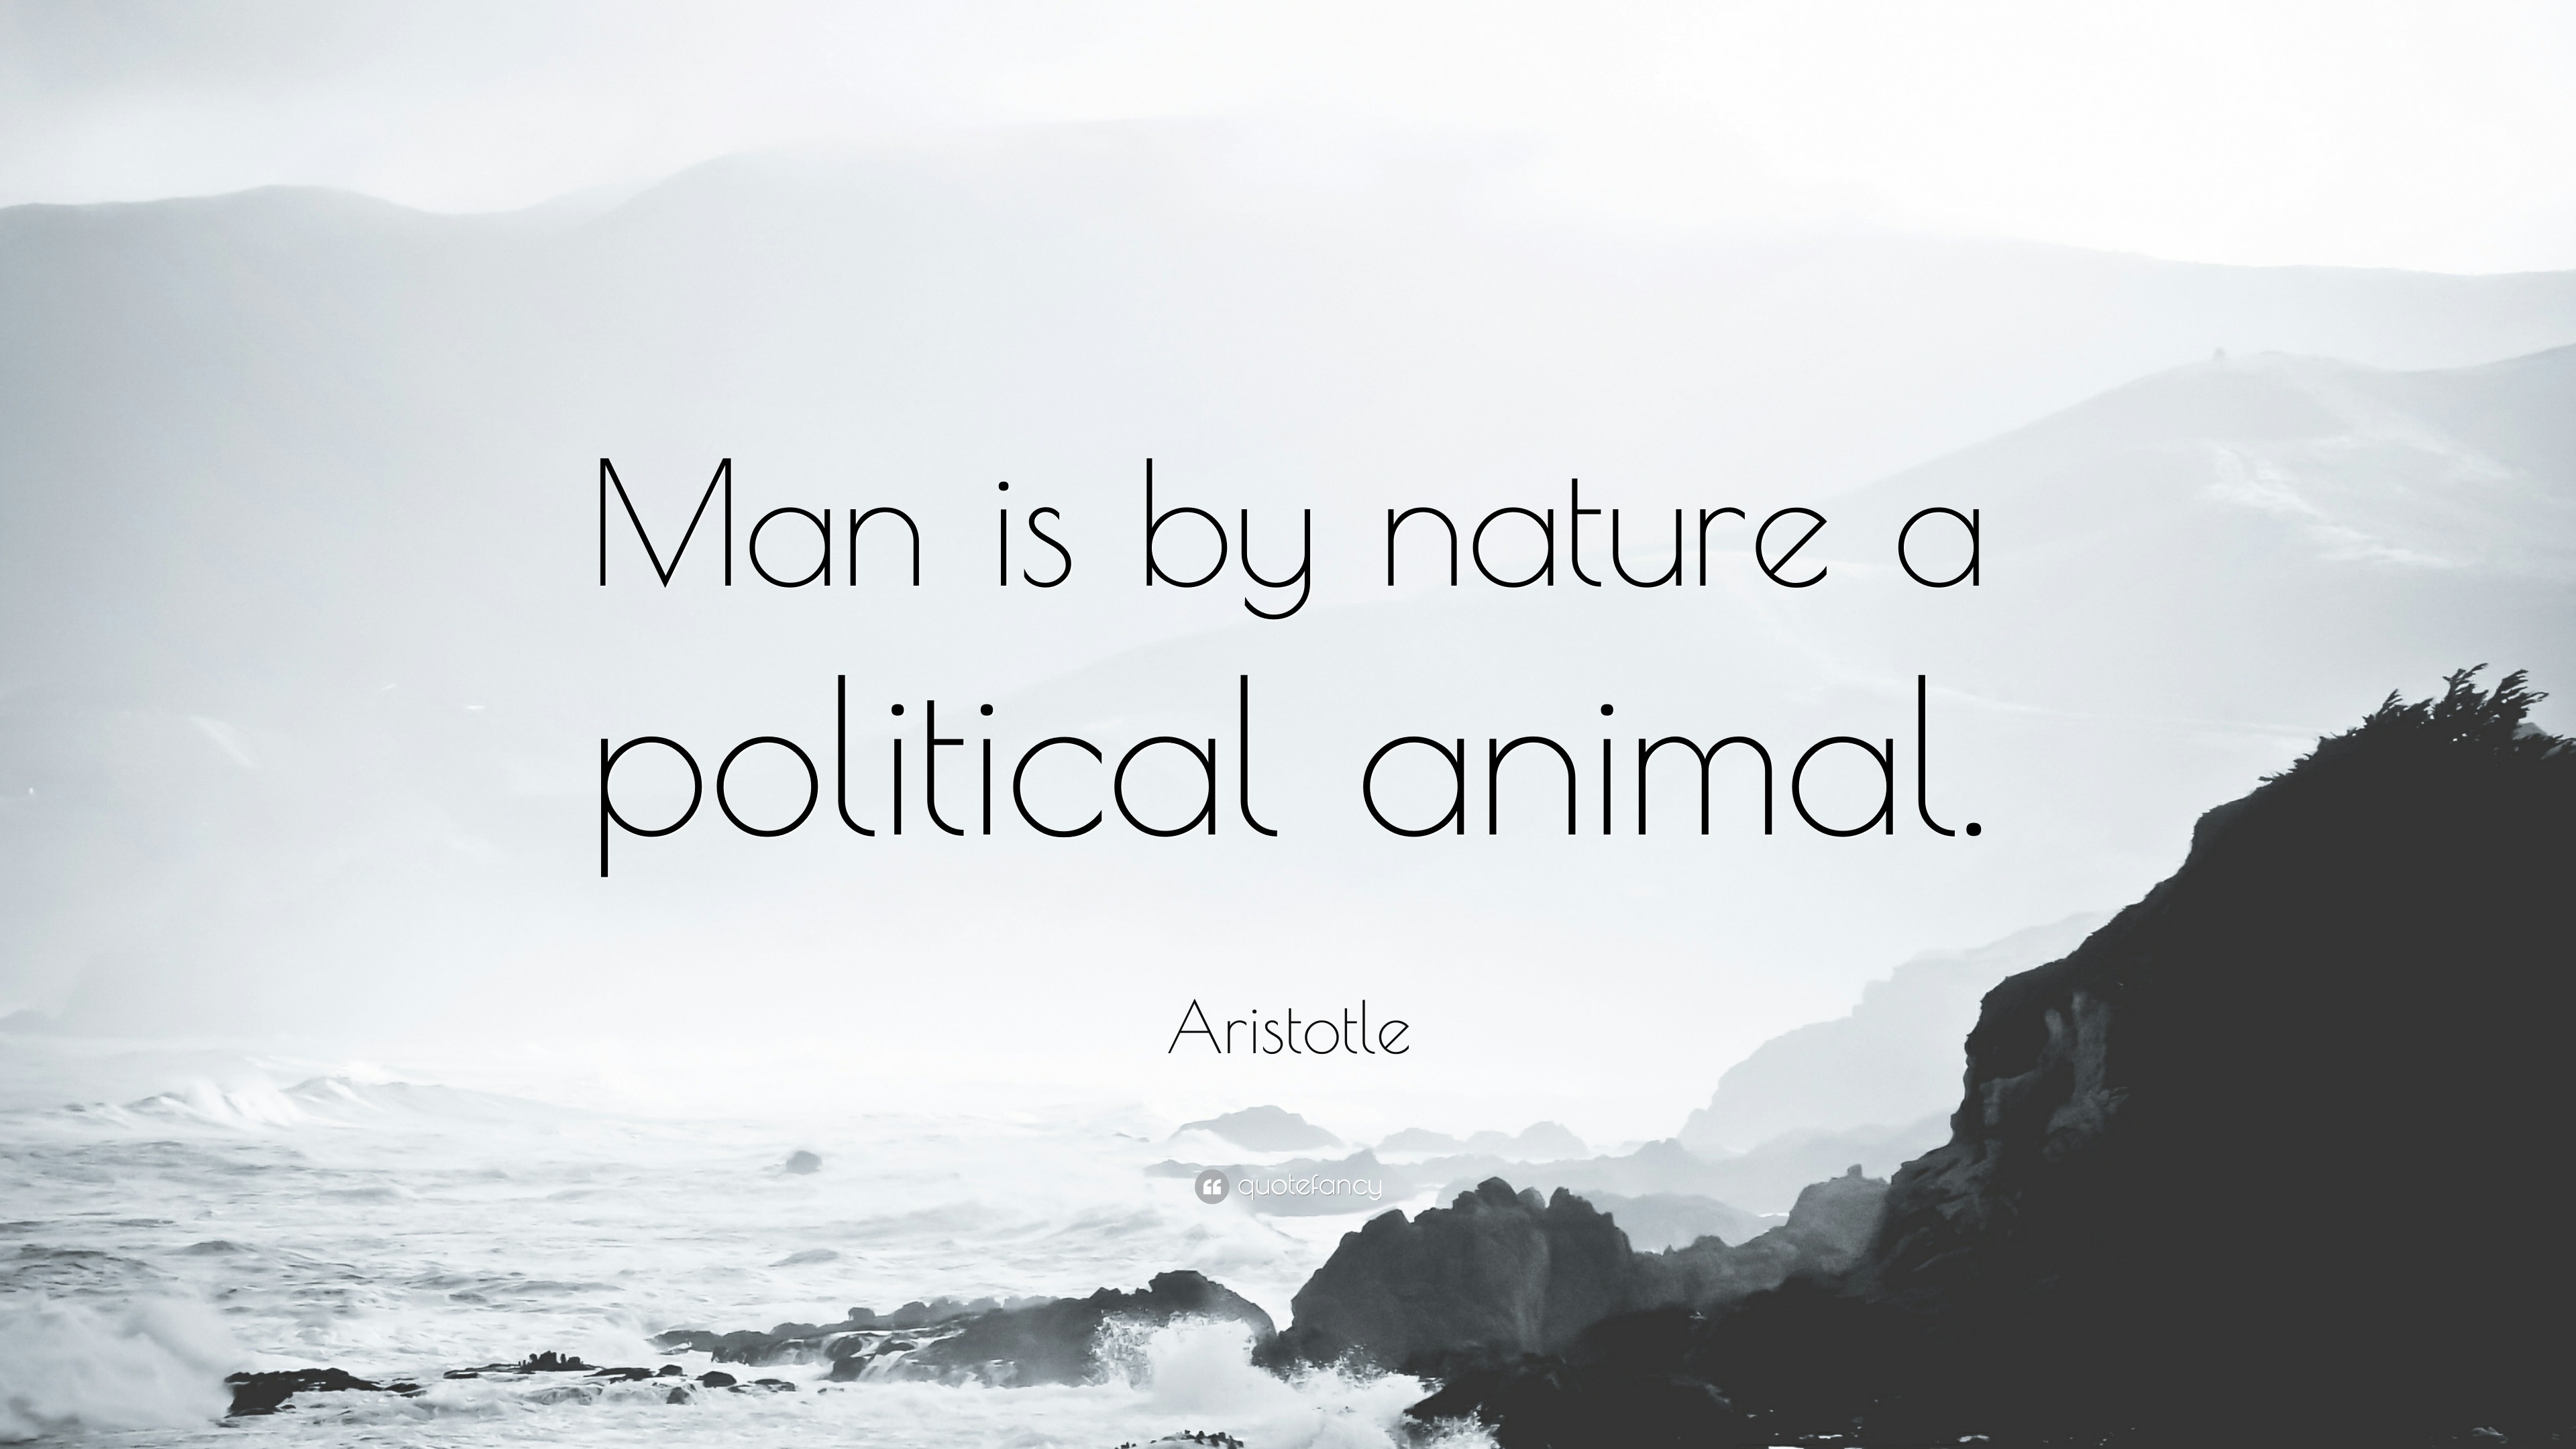 Aristotle Quote: “Man is by nature a political animal.”